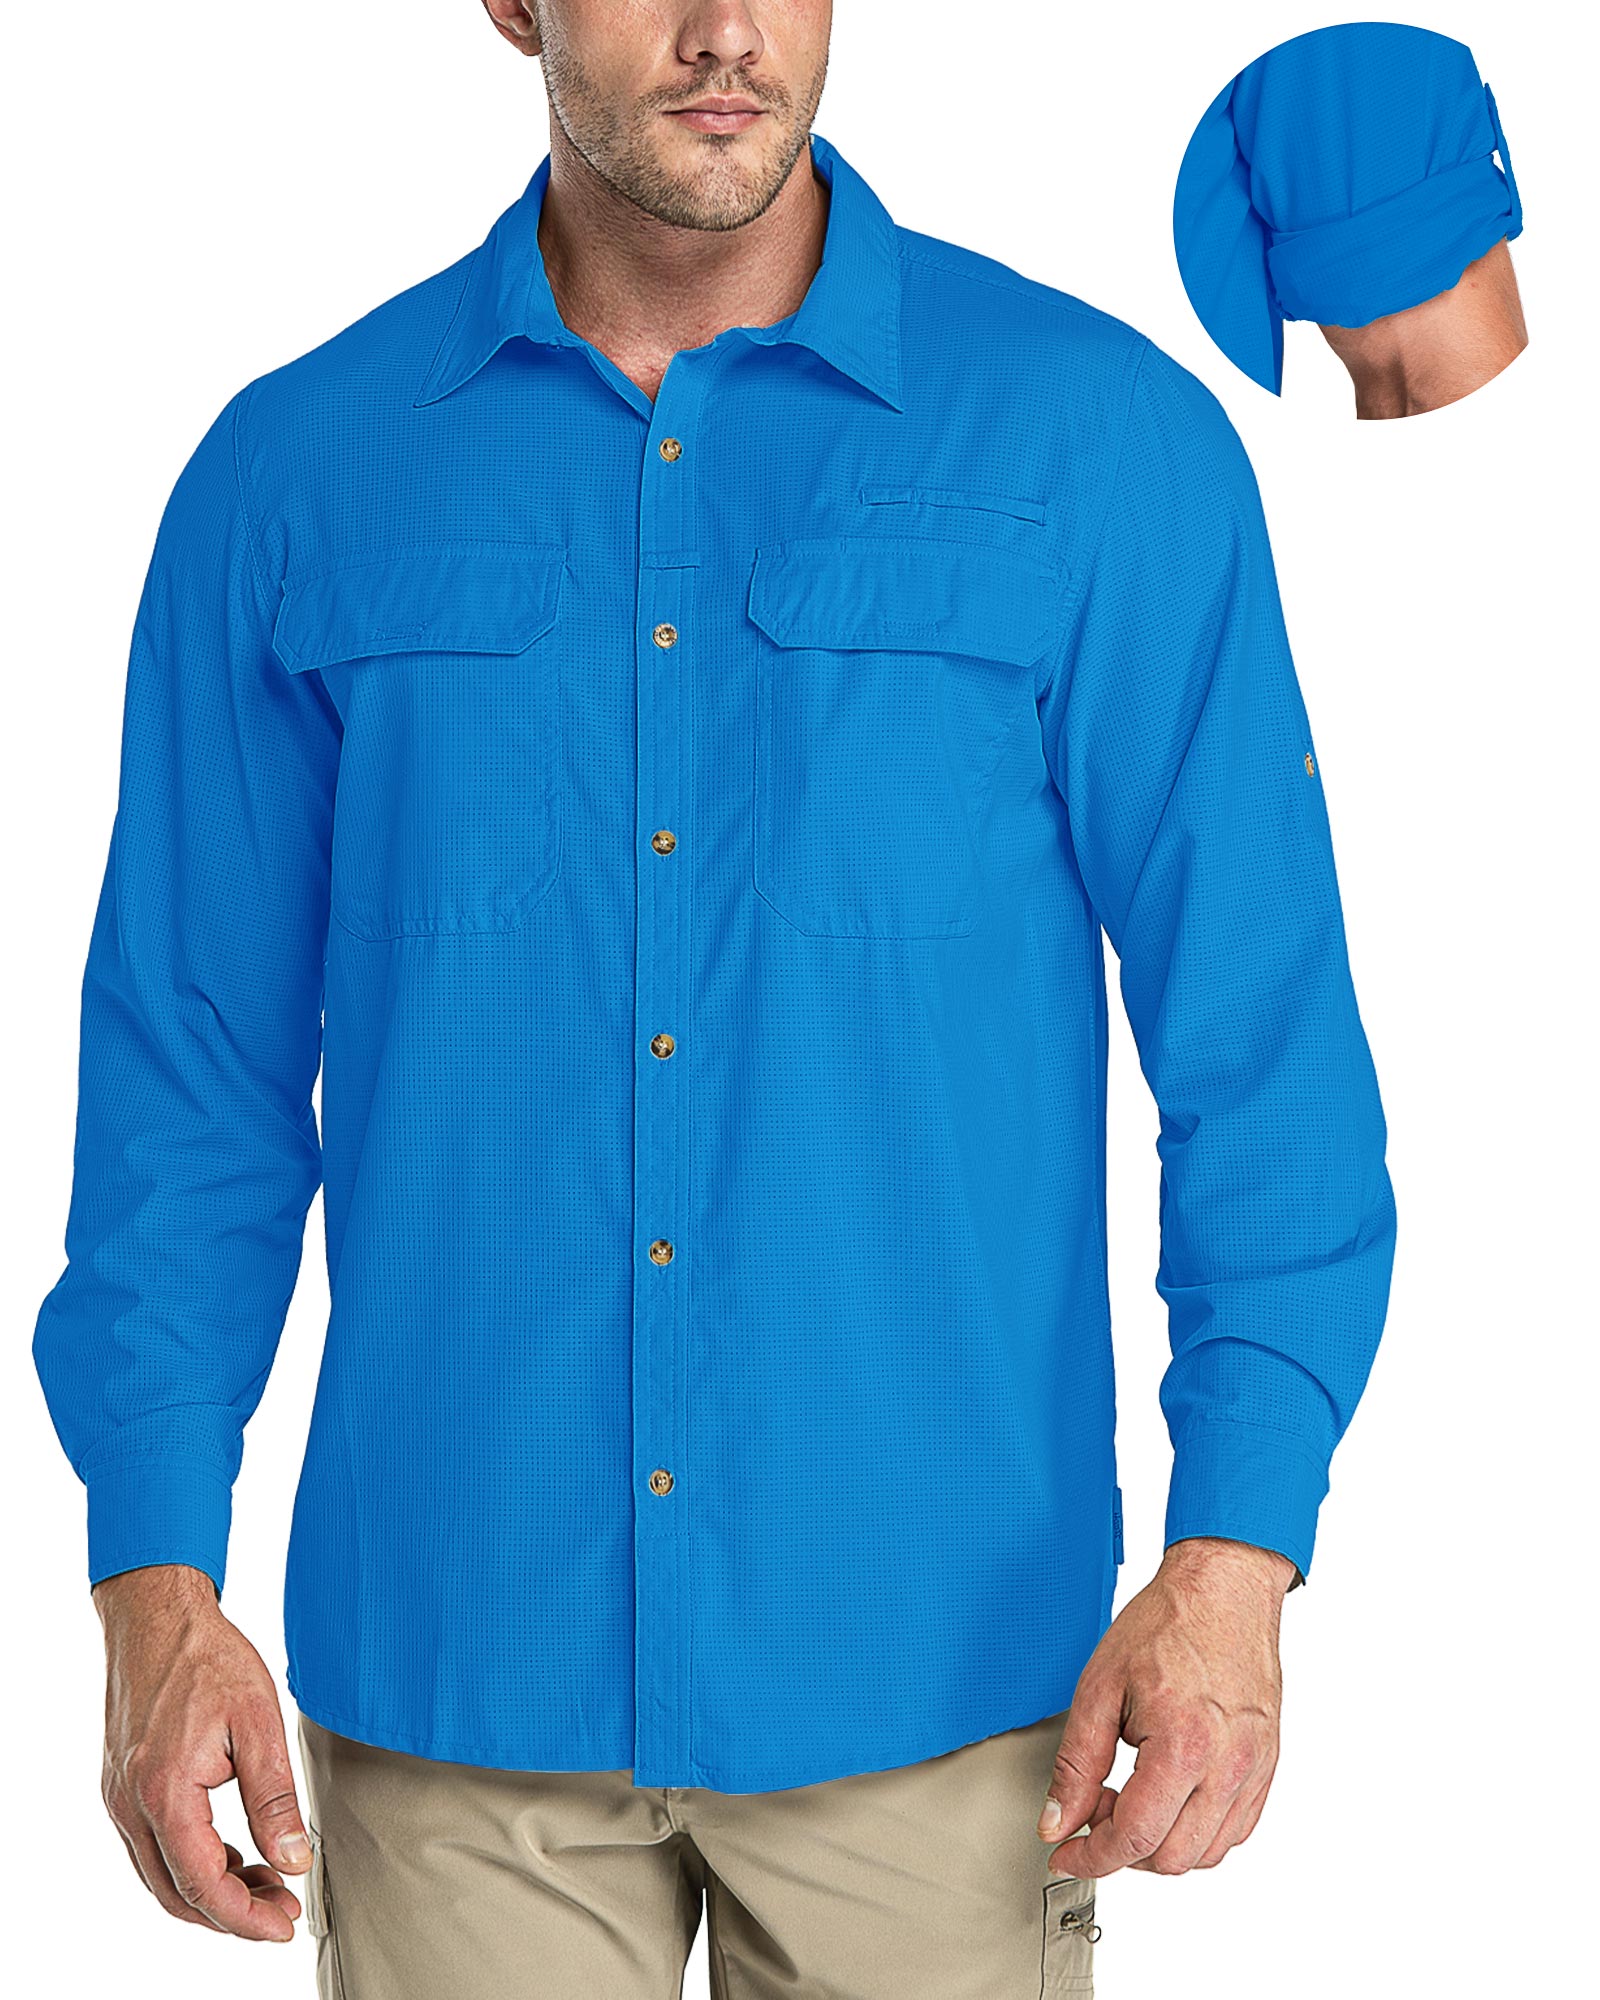 Men's Long Sleeve UPF 50+ GEO® Air-Hole Dry Cooling Shirts with